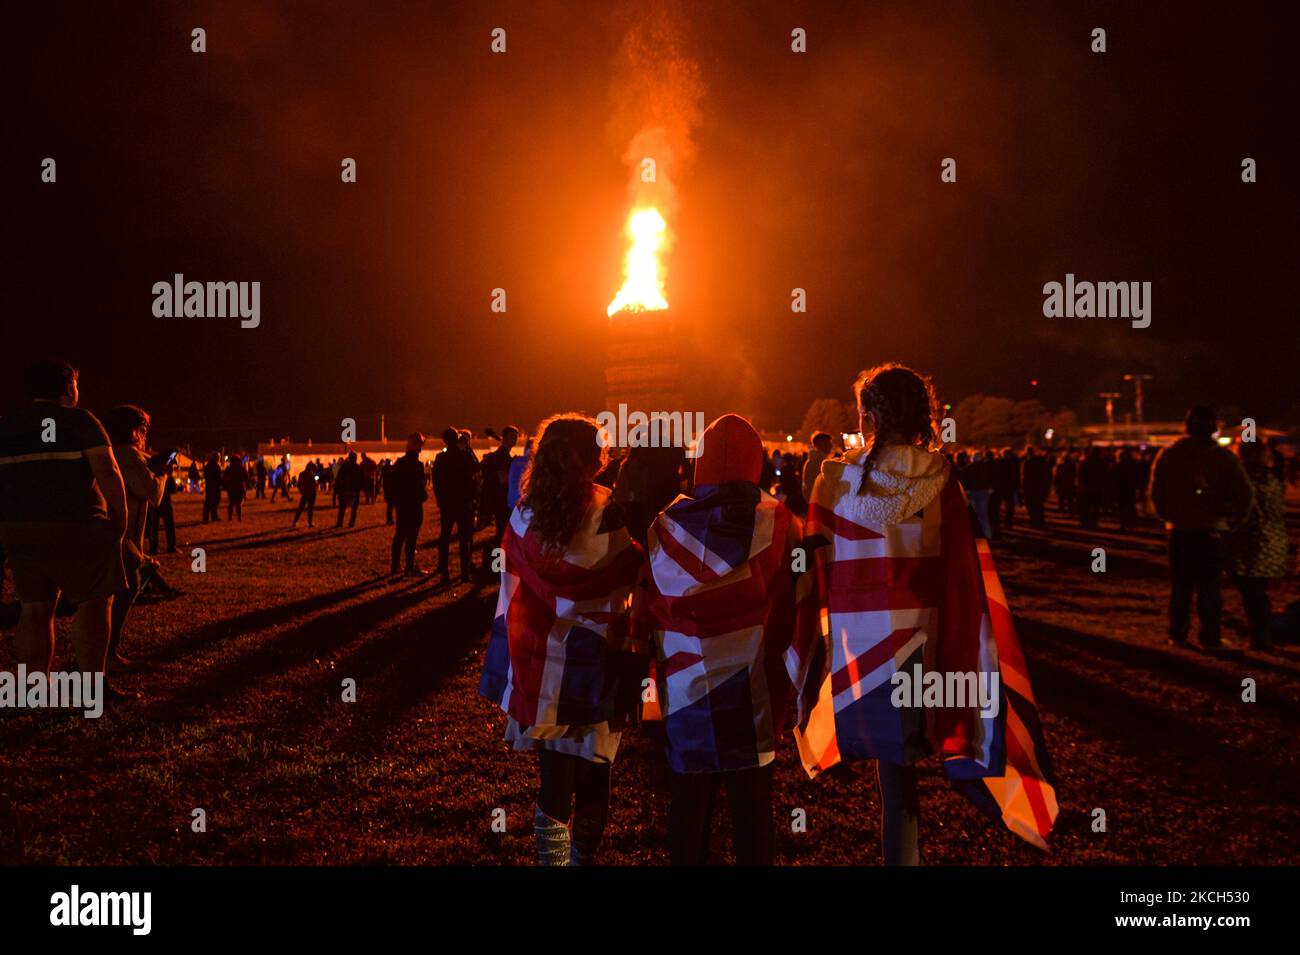 People watch a large bonfire during the Eleventh Night marking the start of the unionist Twelfth celebrations, in Craigy Hill, Larne. Tonight, large bonfires are lit in many Protestant loyalist neighbourhoods of Northern Ireland. Bonfires were originally lit to celebrate the Glorious Revolution (1688) and victory of Protestant king William of Orange over Catholic king James II at the Battle of the Boyne (1690), which began the Protestant Ascendancy in Ireland. On Monday, 12 July 2021, in Larne, County Antrim, Northern Ireland (Photo by Artur Widak/NurPhoto) Stock Photo